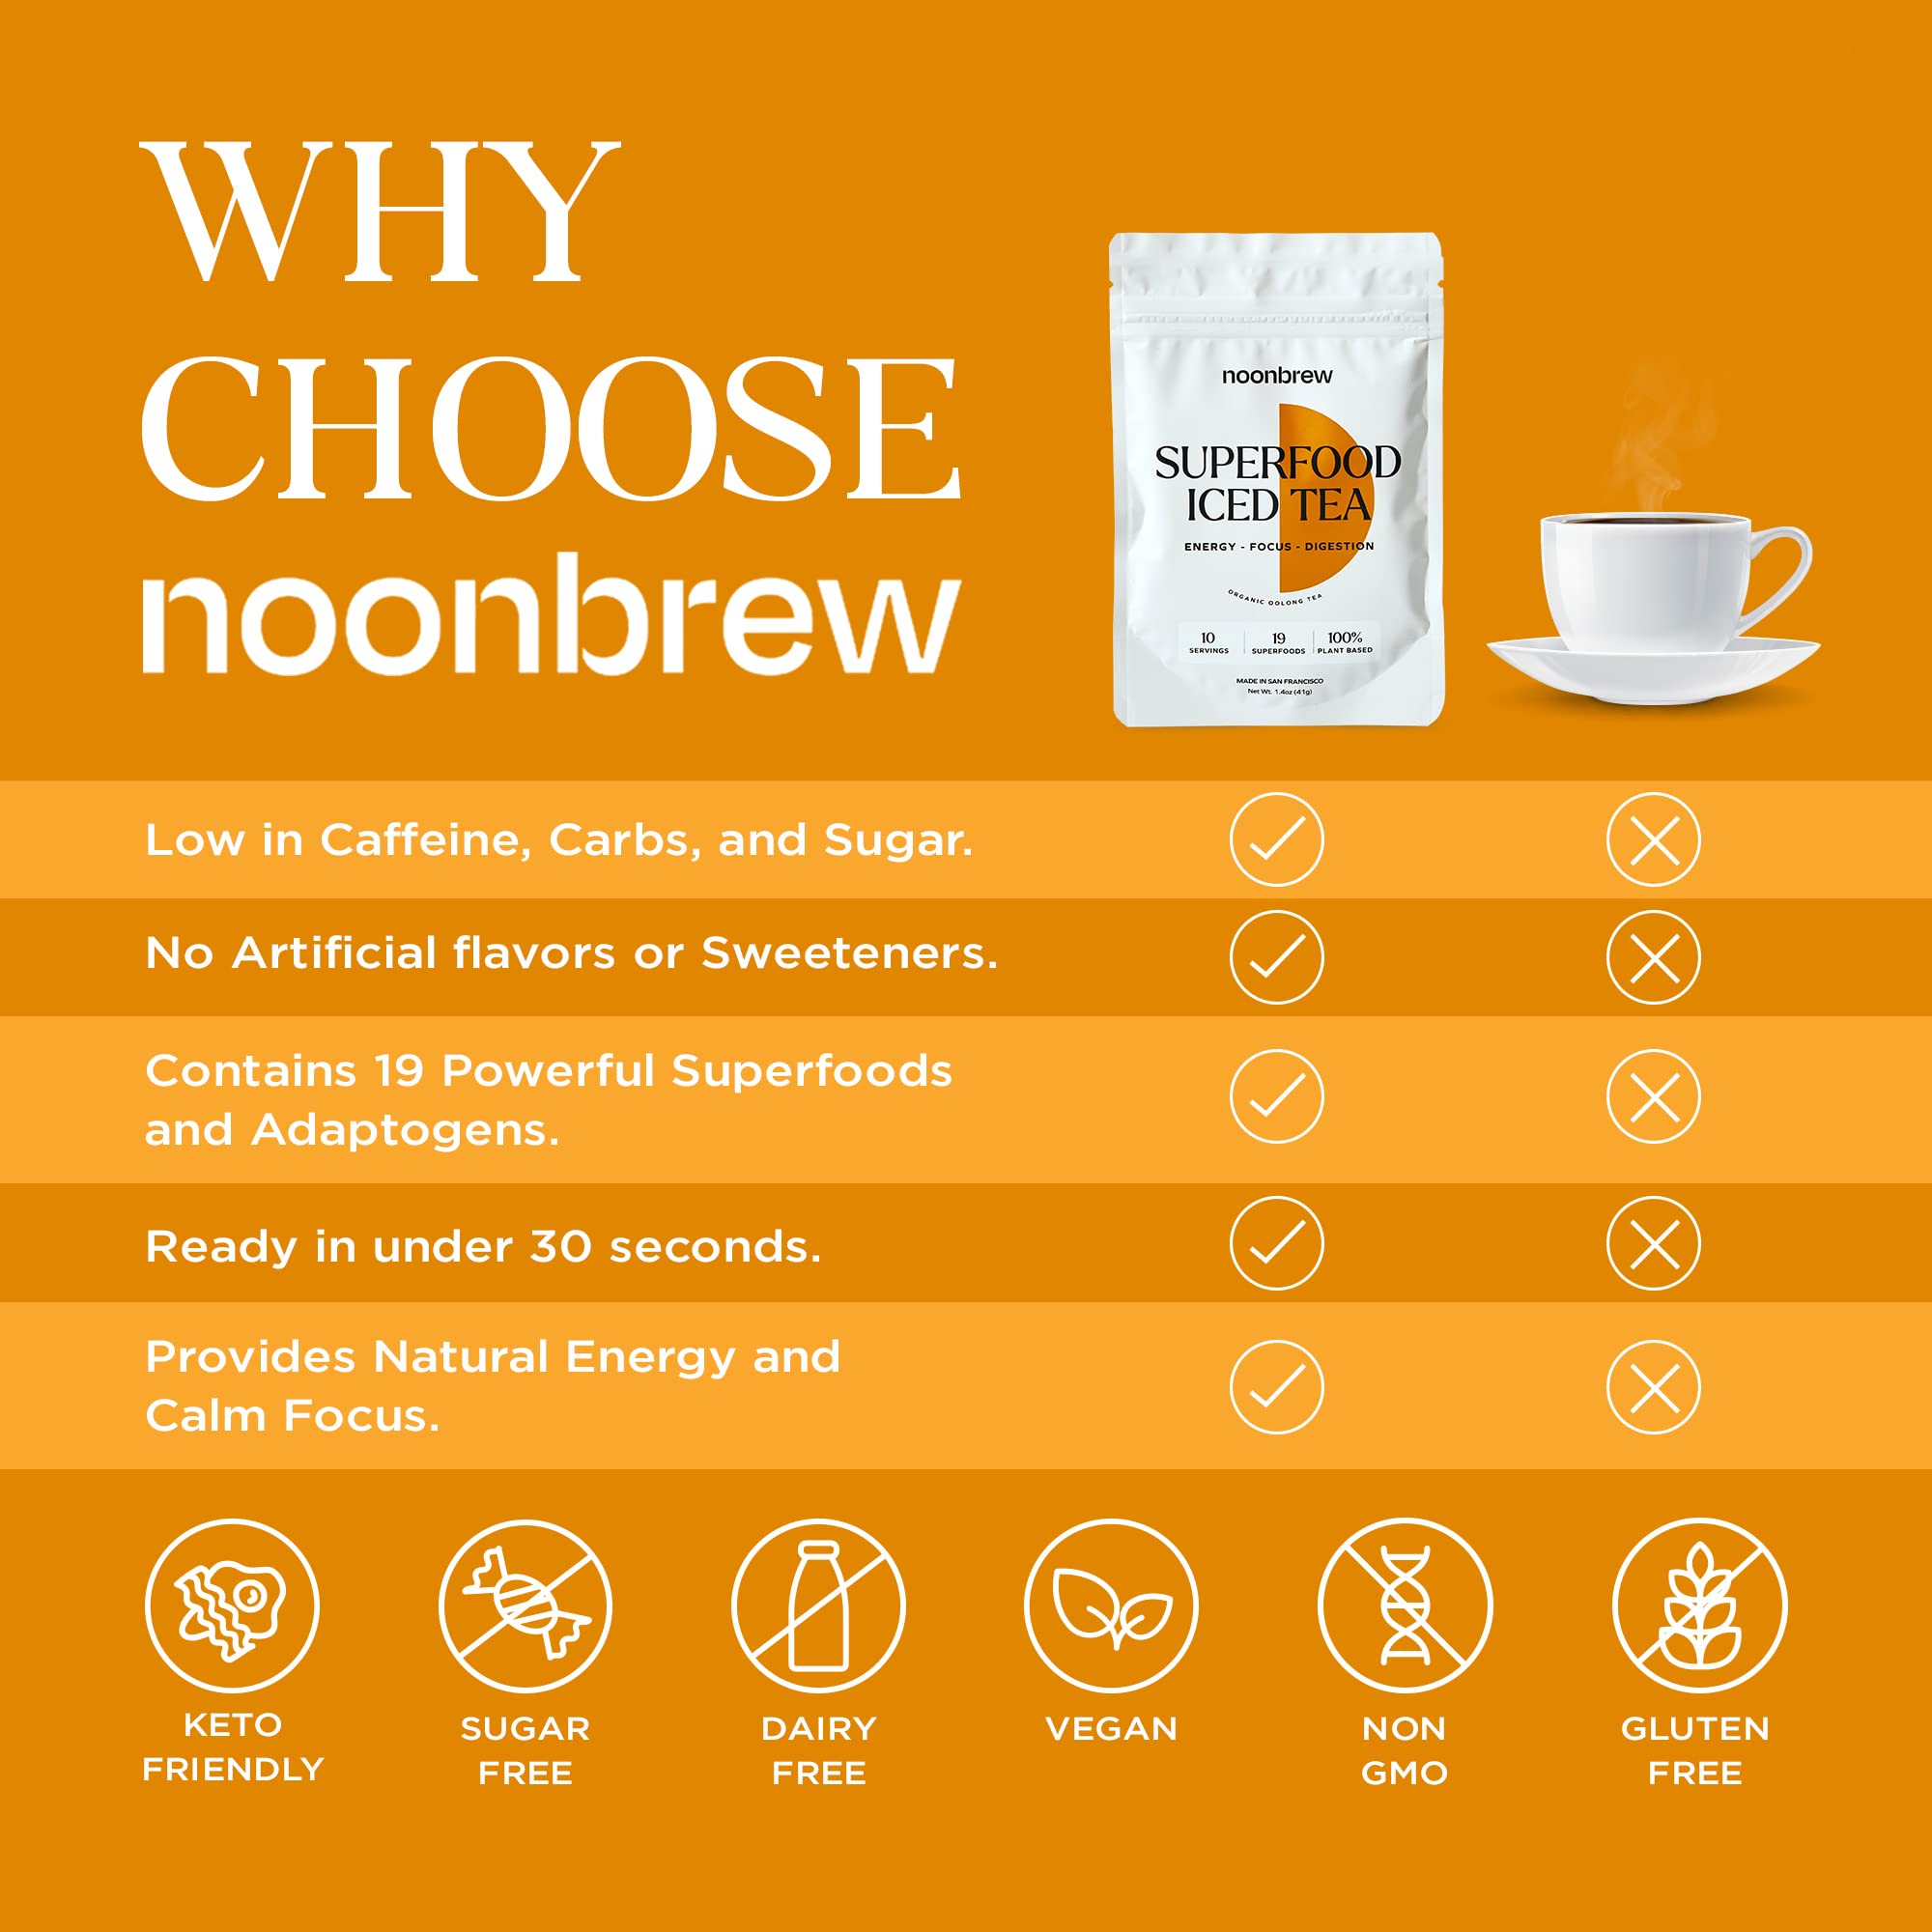 NoonBrew SuperFood Iced Tea - 19 SuperFoods and Adaptogens for All Day Focus, Energy, Digestion Support, Stress Relief, and No Jitters or Crash - Instant Coffee Substitute, Vegan, Keto Friendly, Gluten Free, Low Caffeine (10 Servings - #1 SuperFood Organi